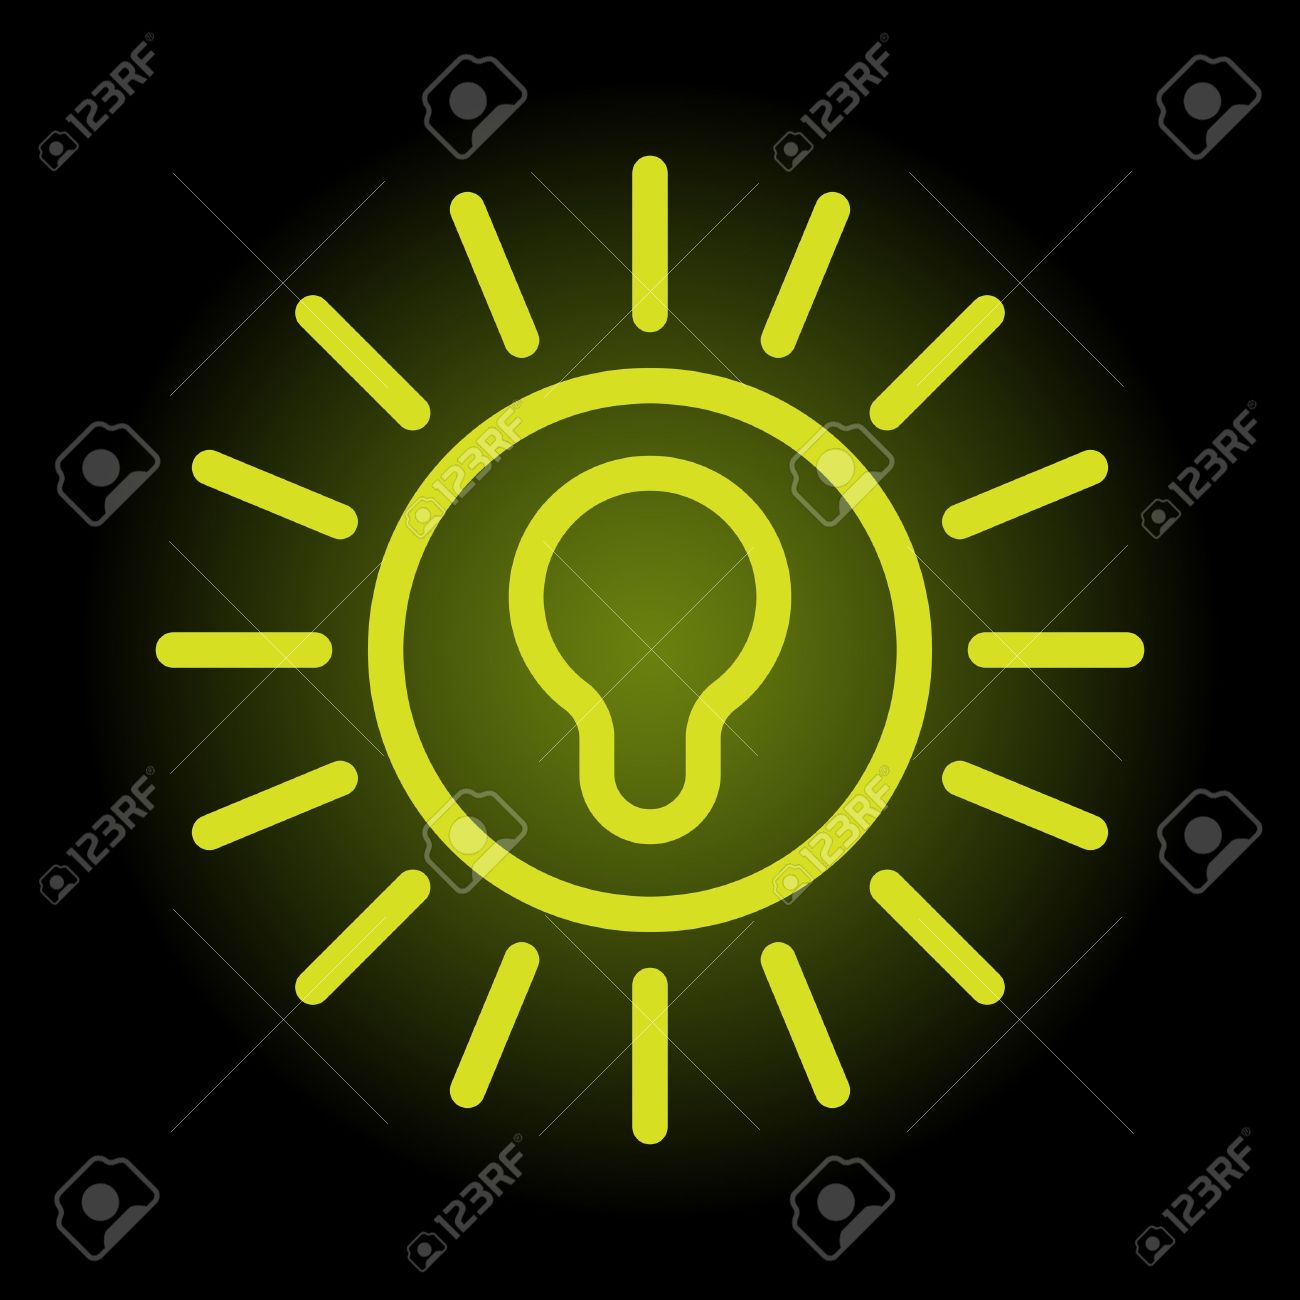 3,548 Green Energy Logo Stock Vector Illustration And Royalty Free.